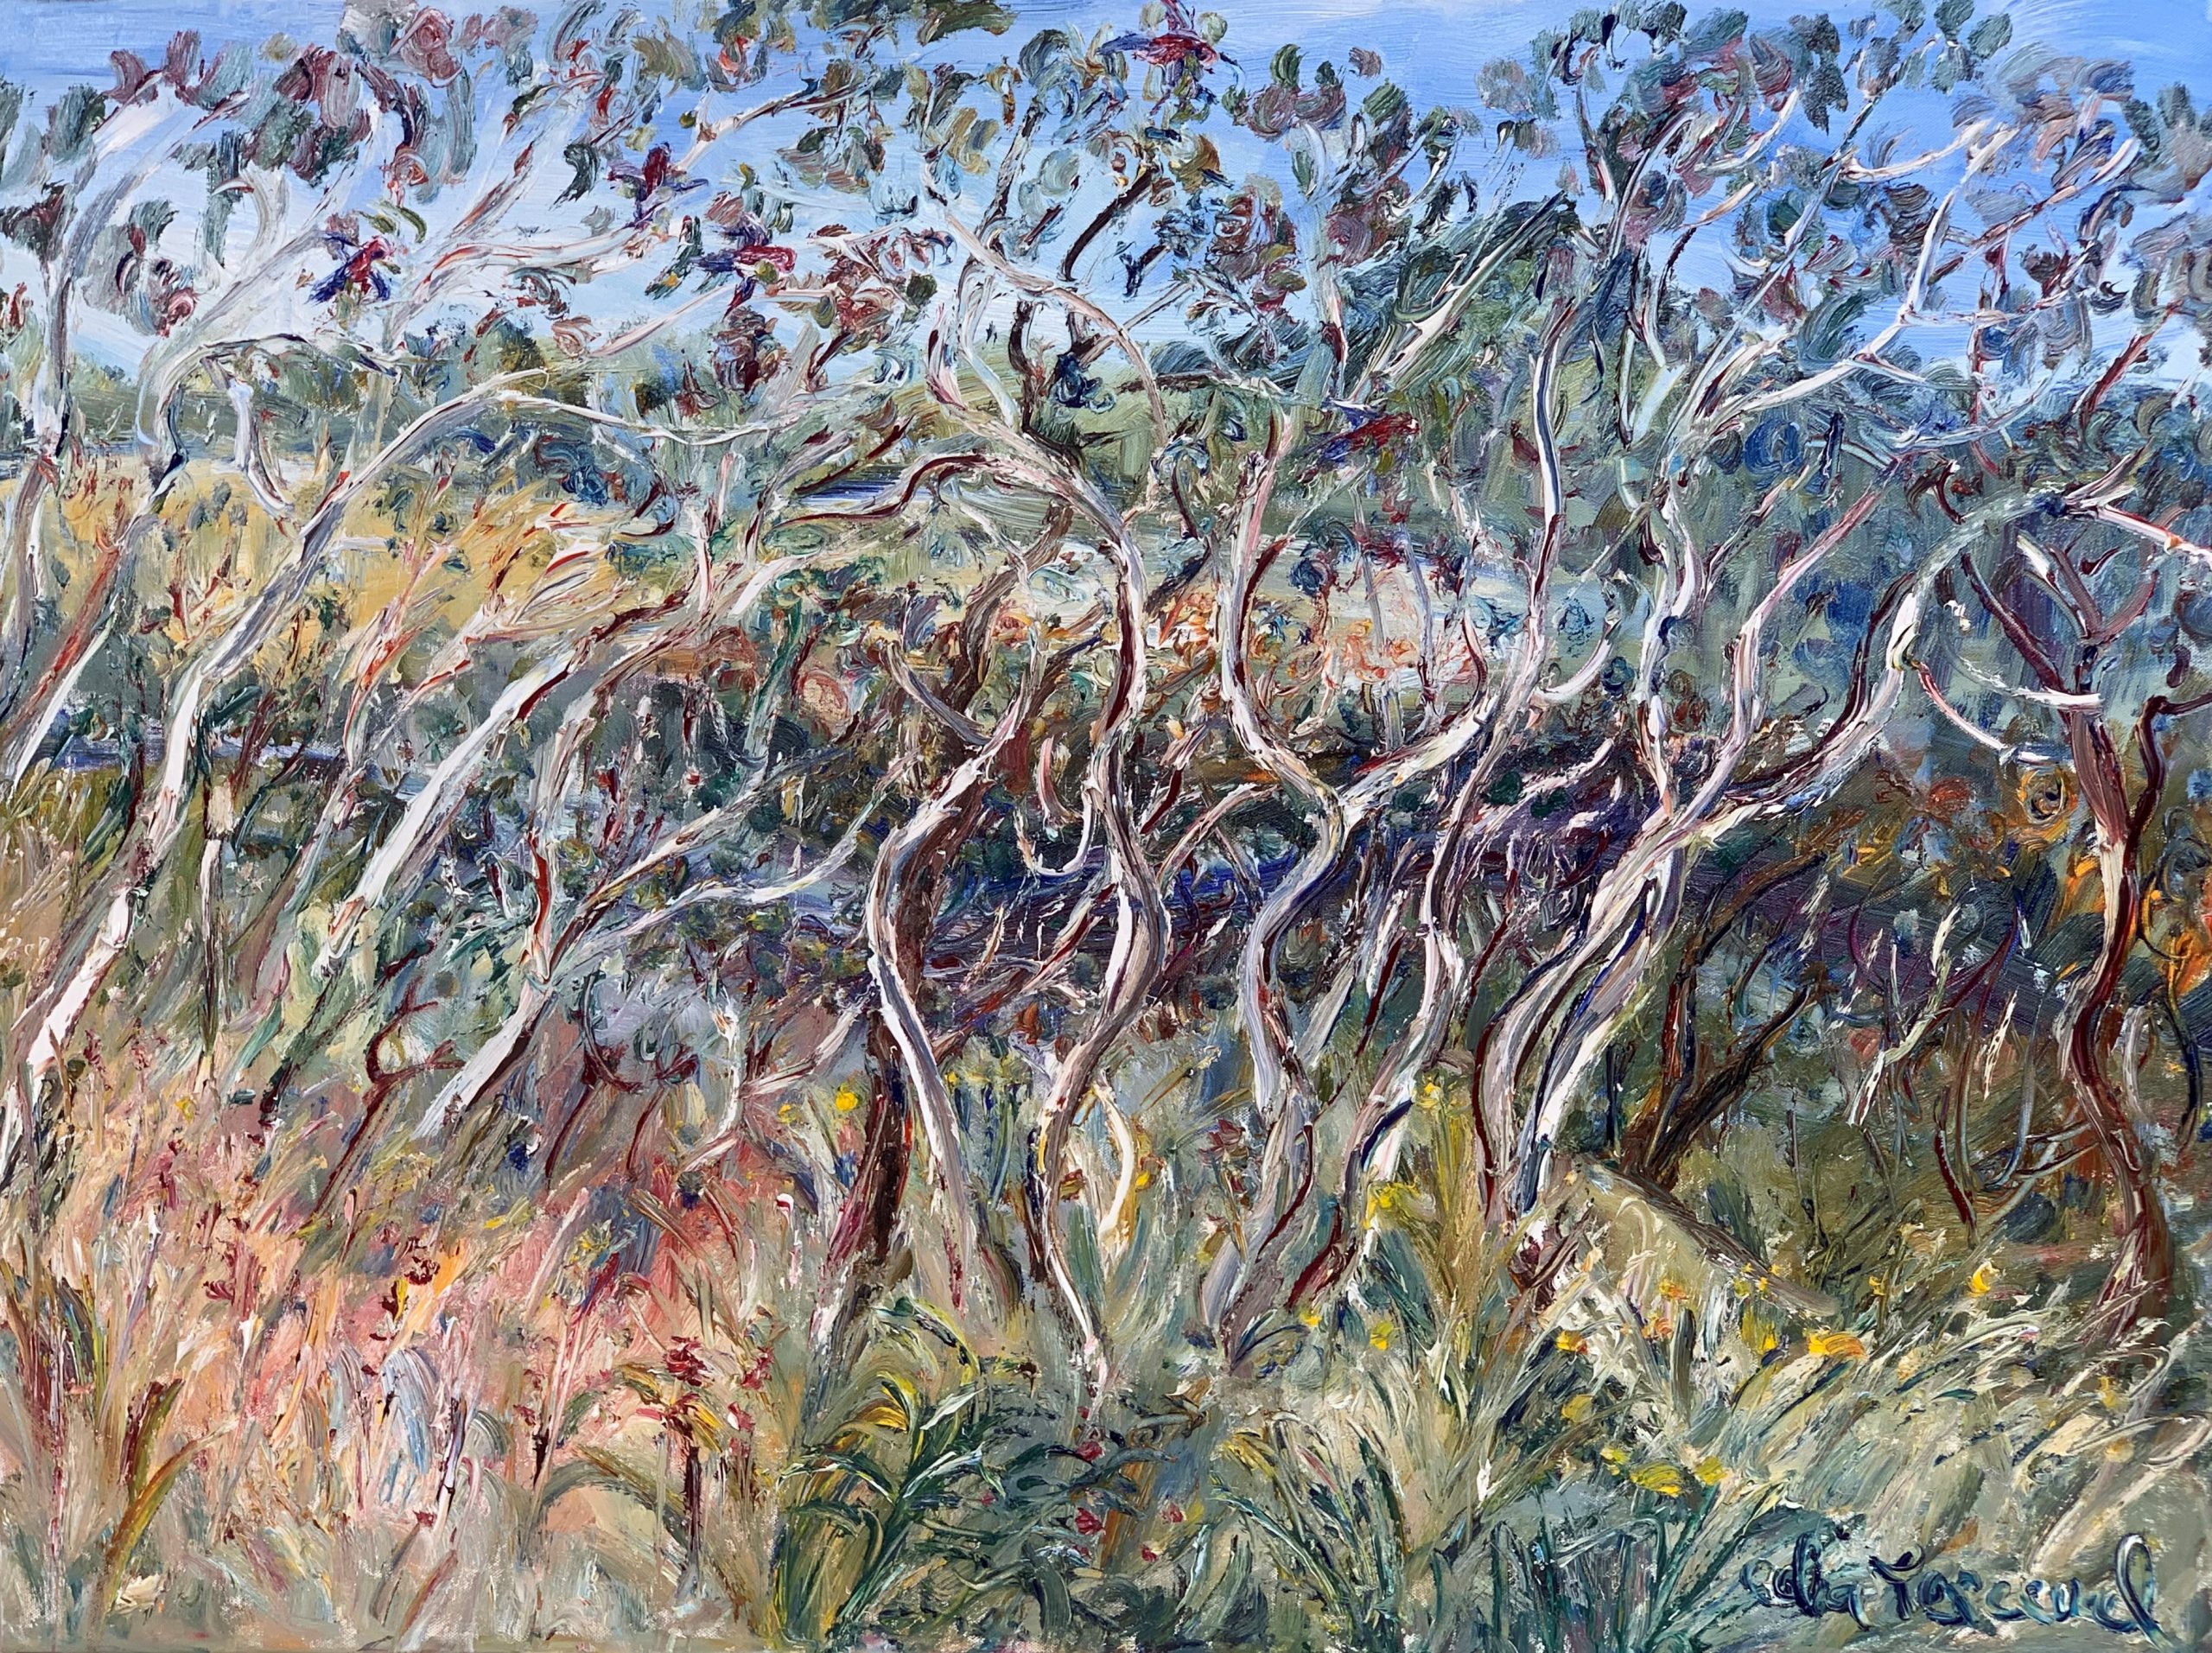 Celia Perceval 'Rosellas in the Snow Gums on Mongarlow River' oil on canvas 72 x 102cm SOLD